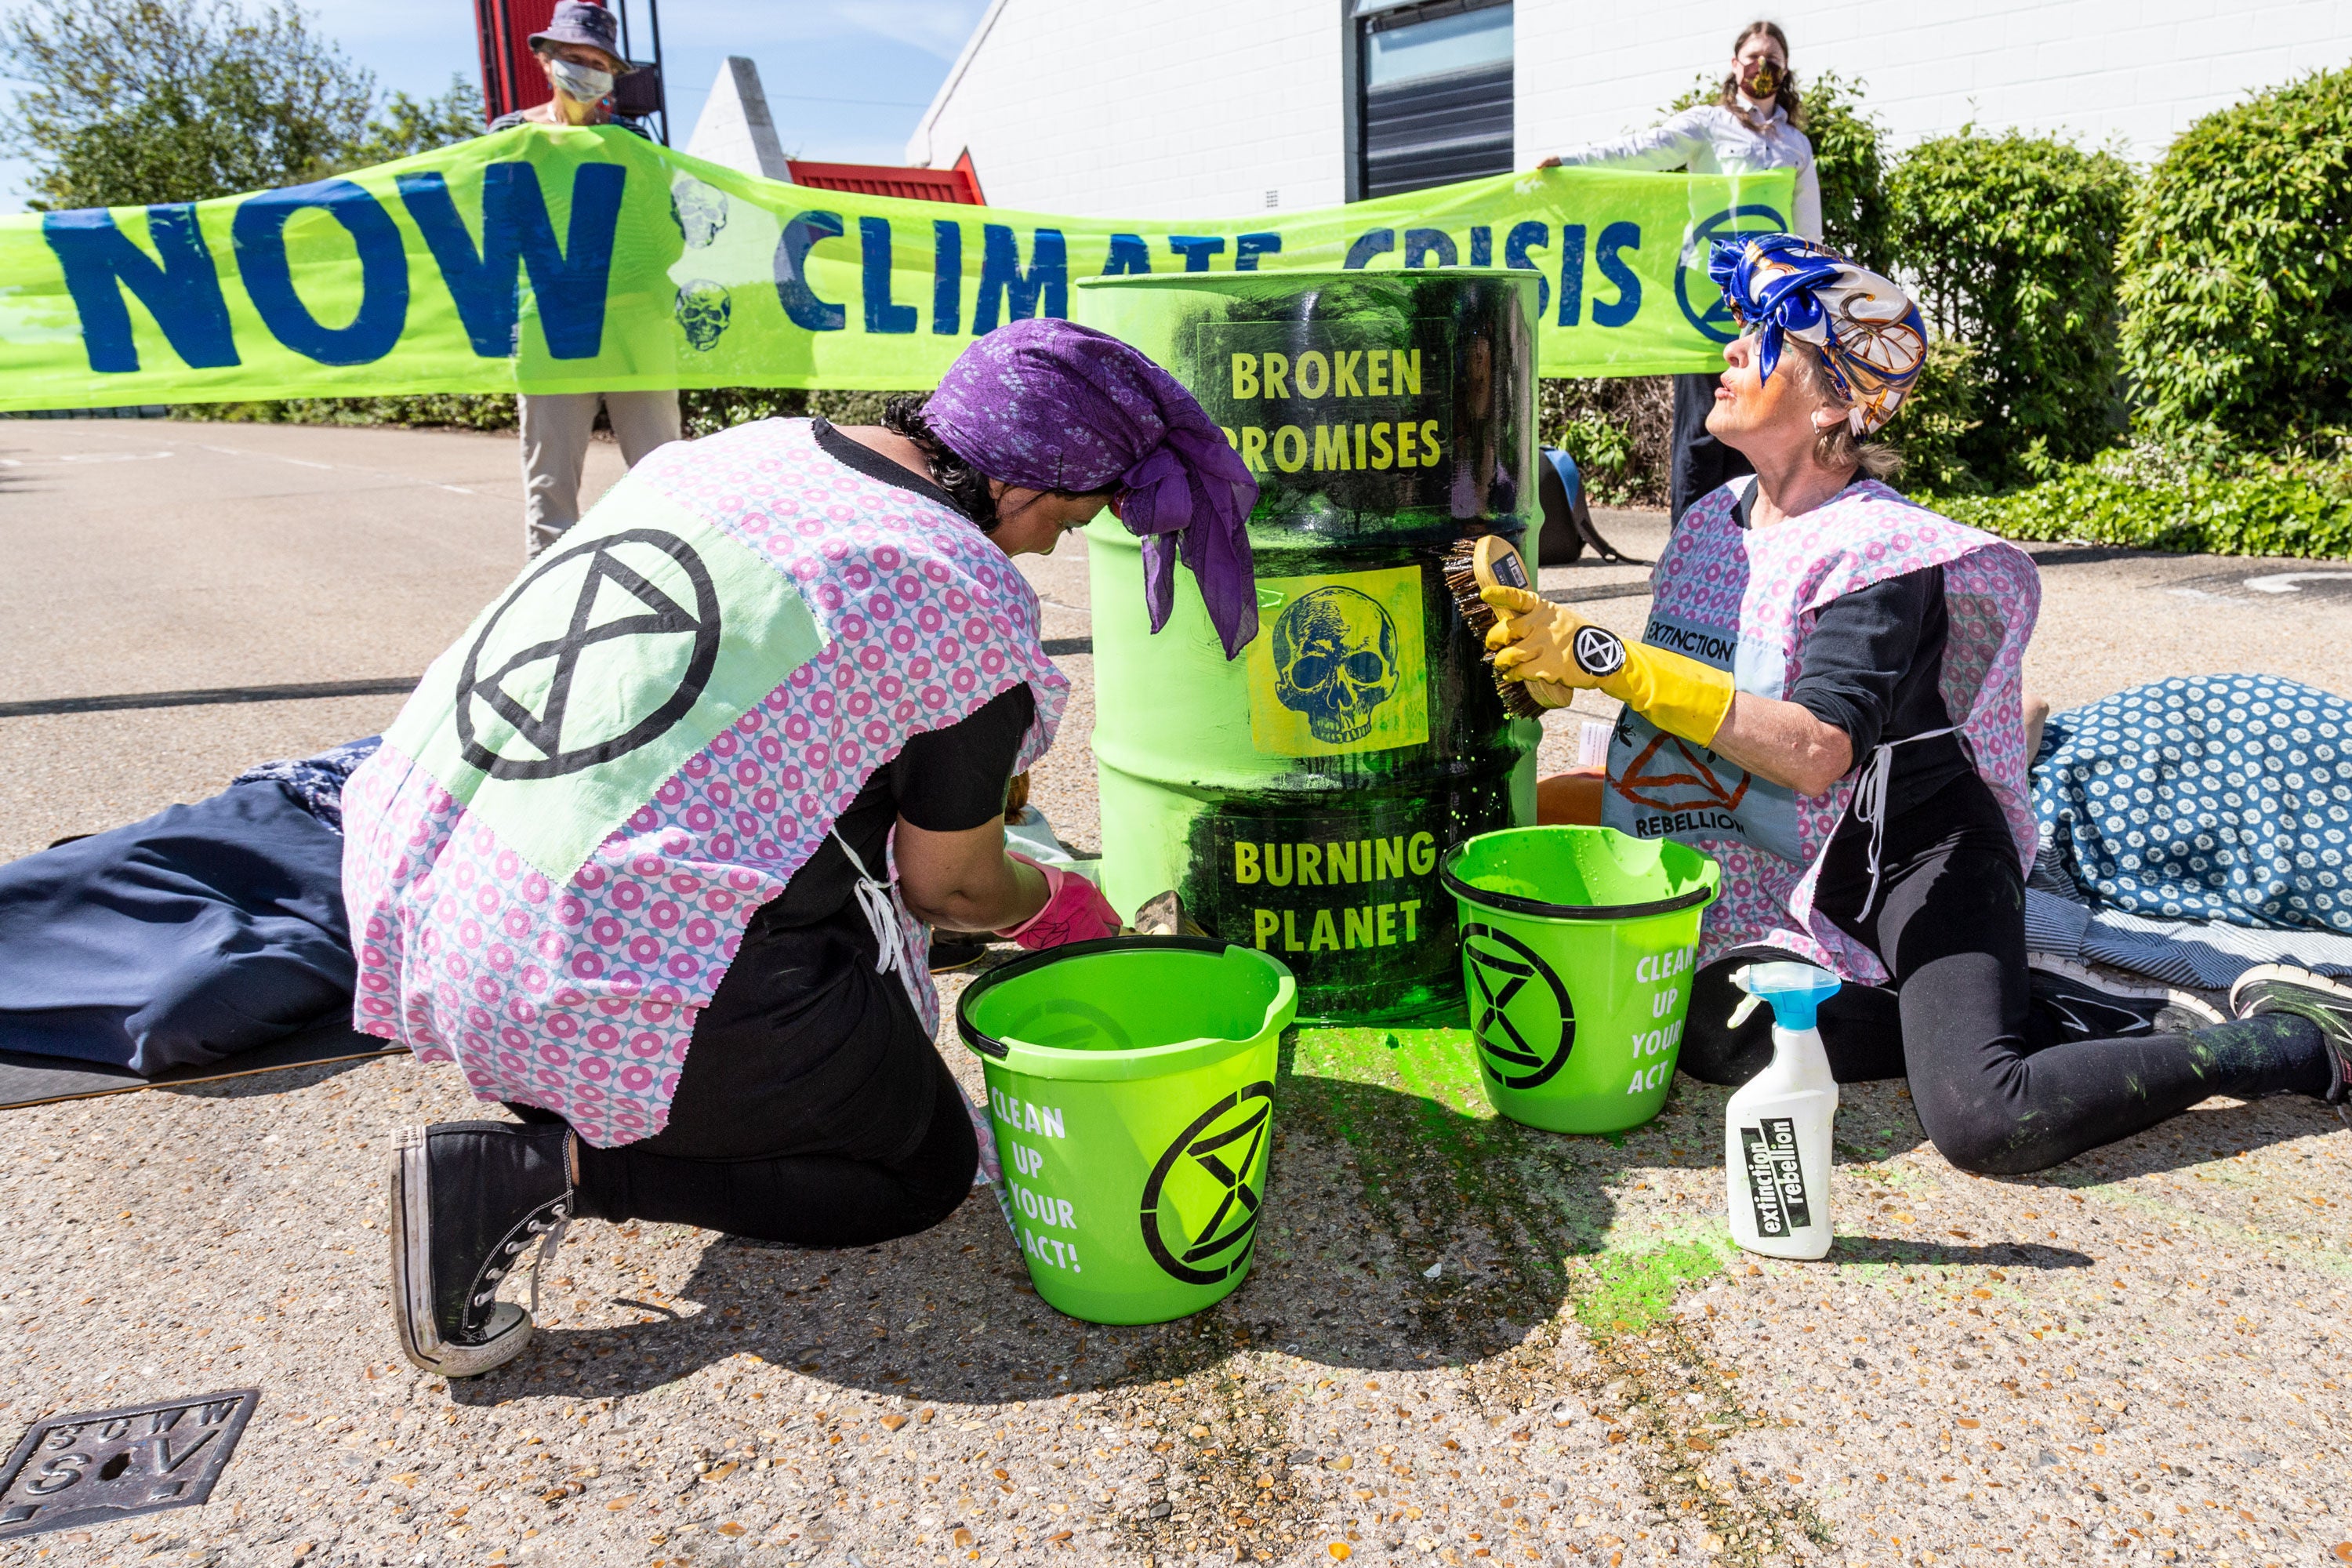 Protesters remove paint from oil drums, symbolically washing away the ‘soothing promises peddled by the UK Government and fossil fuel industry’